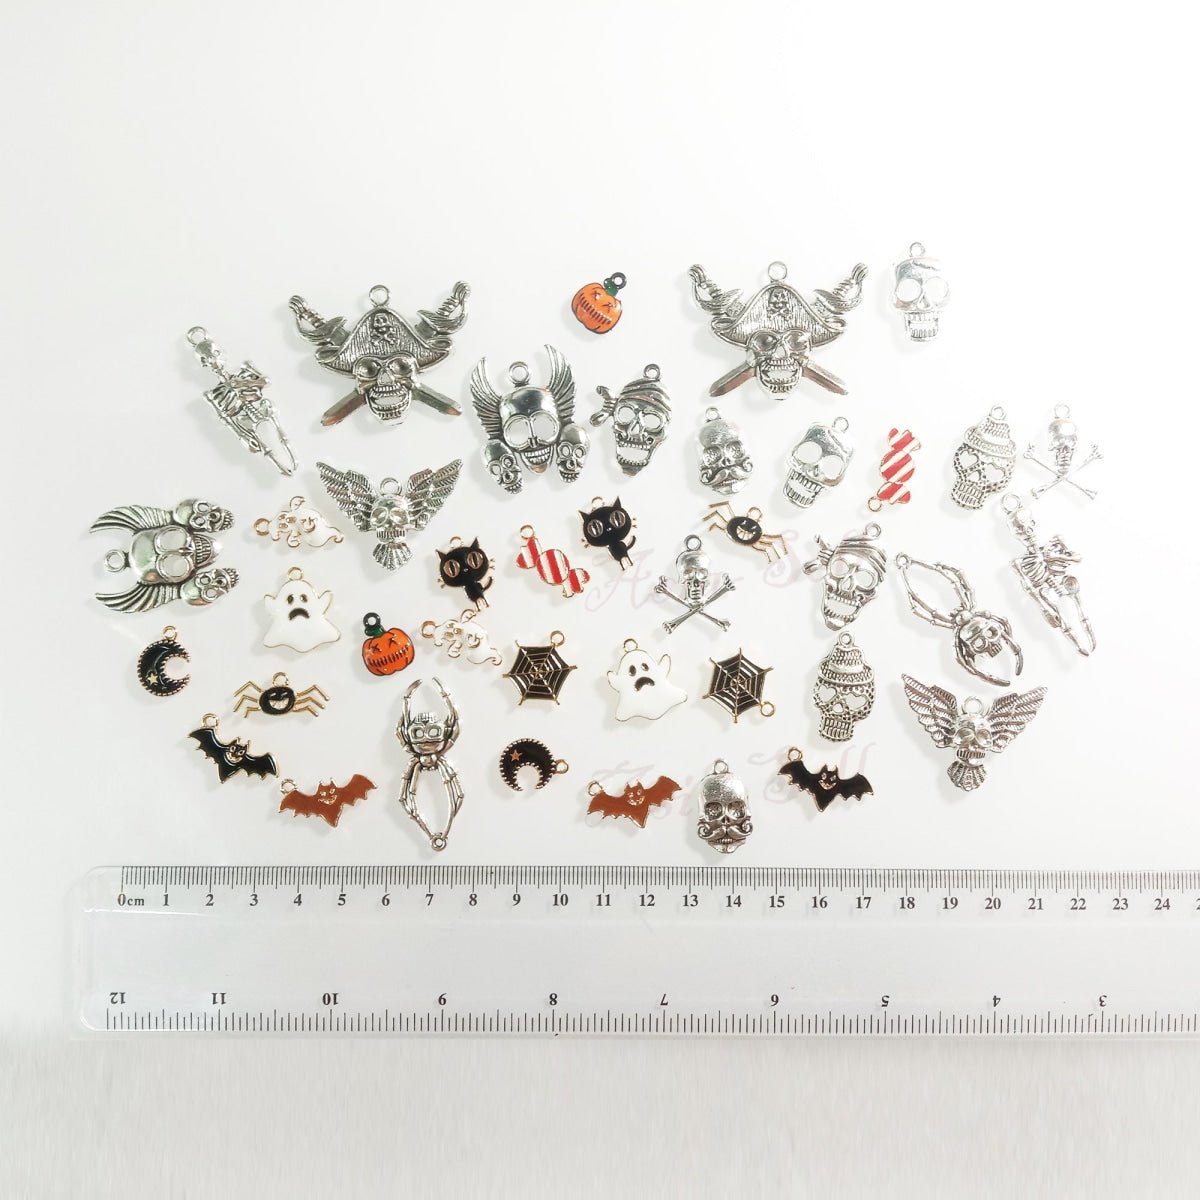 20 Pairs Halloween Charms Mixed Enamel Pendant Jewellery Making Accessories Candy Ghost Pumpkin Bat Spider Cat Skull - Asia Sell